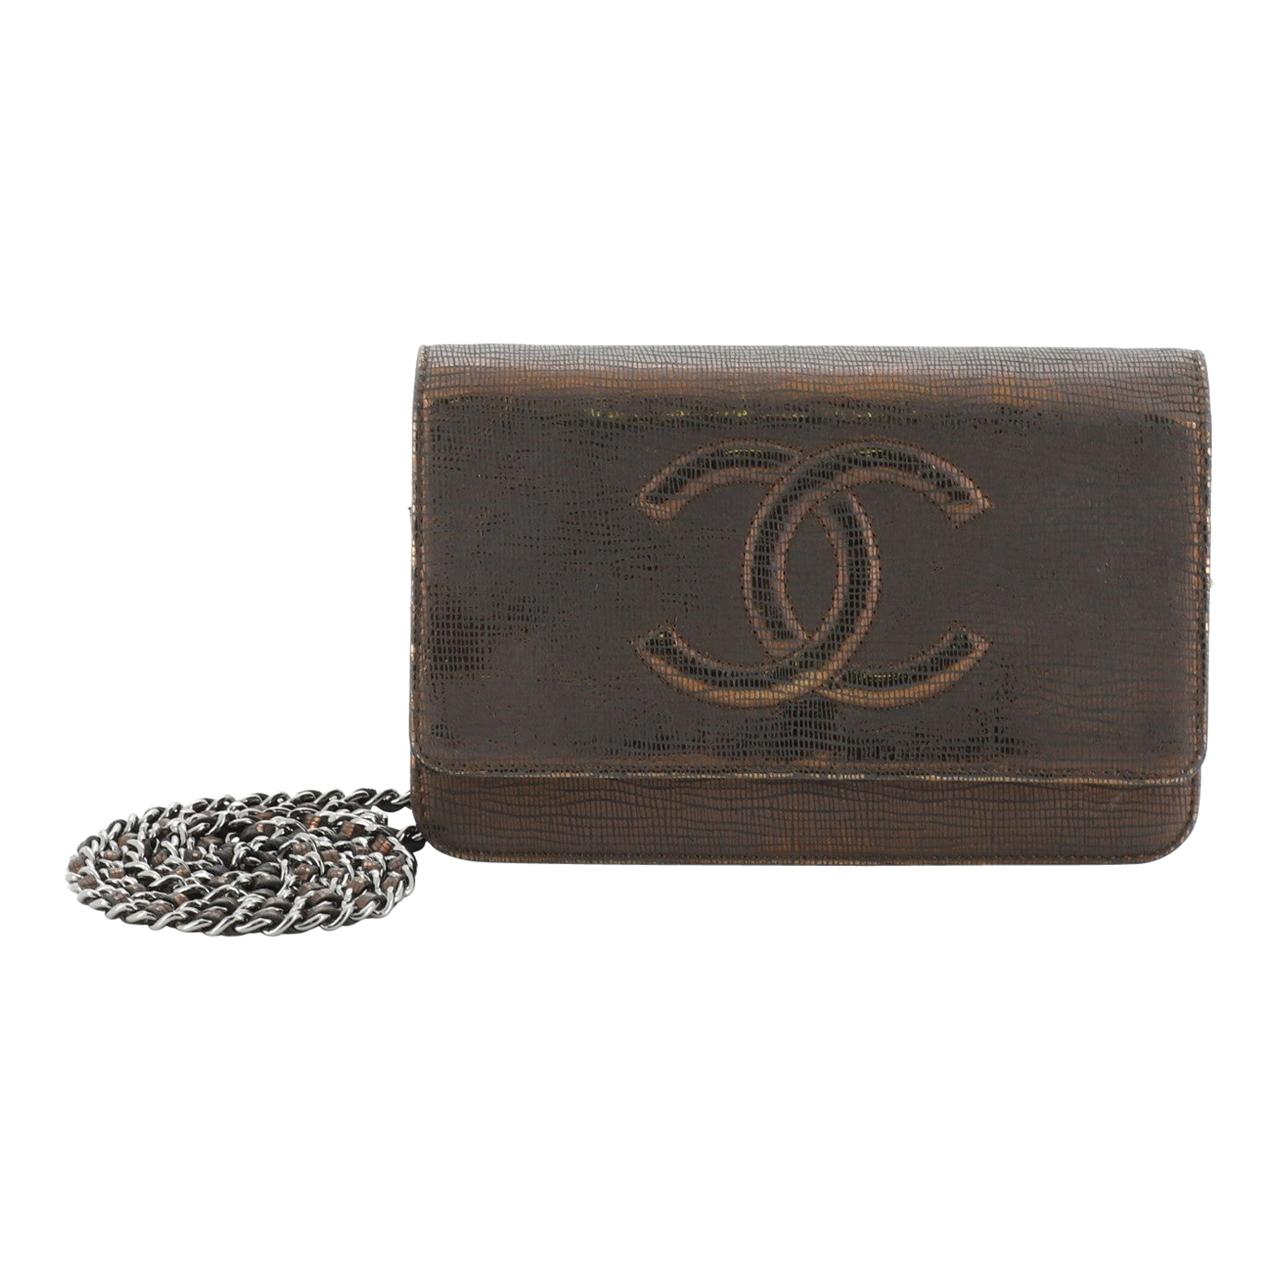 Chanel Timeless Wallet on Chain Textured Leather